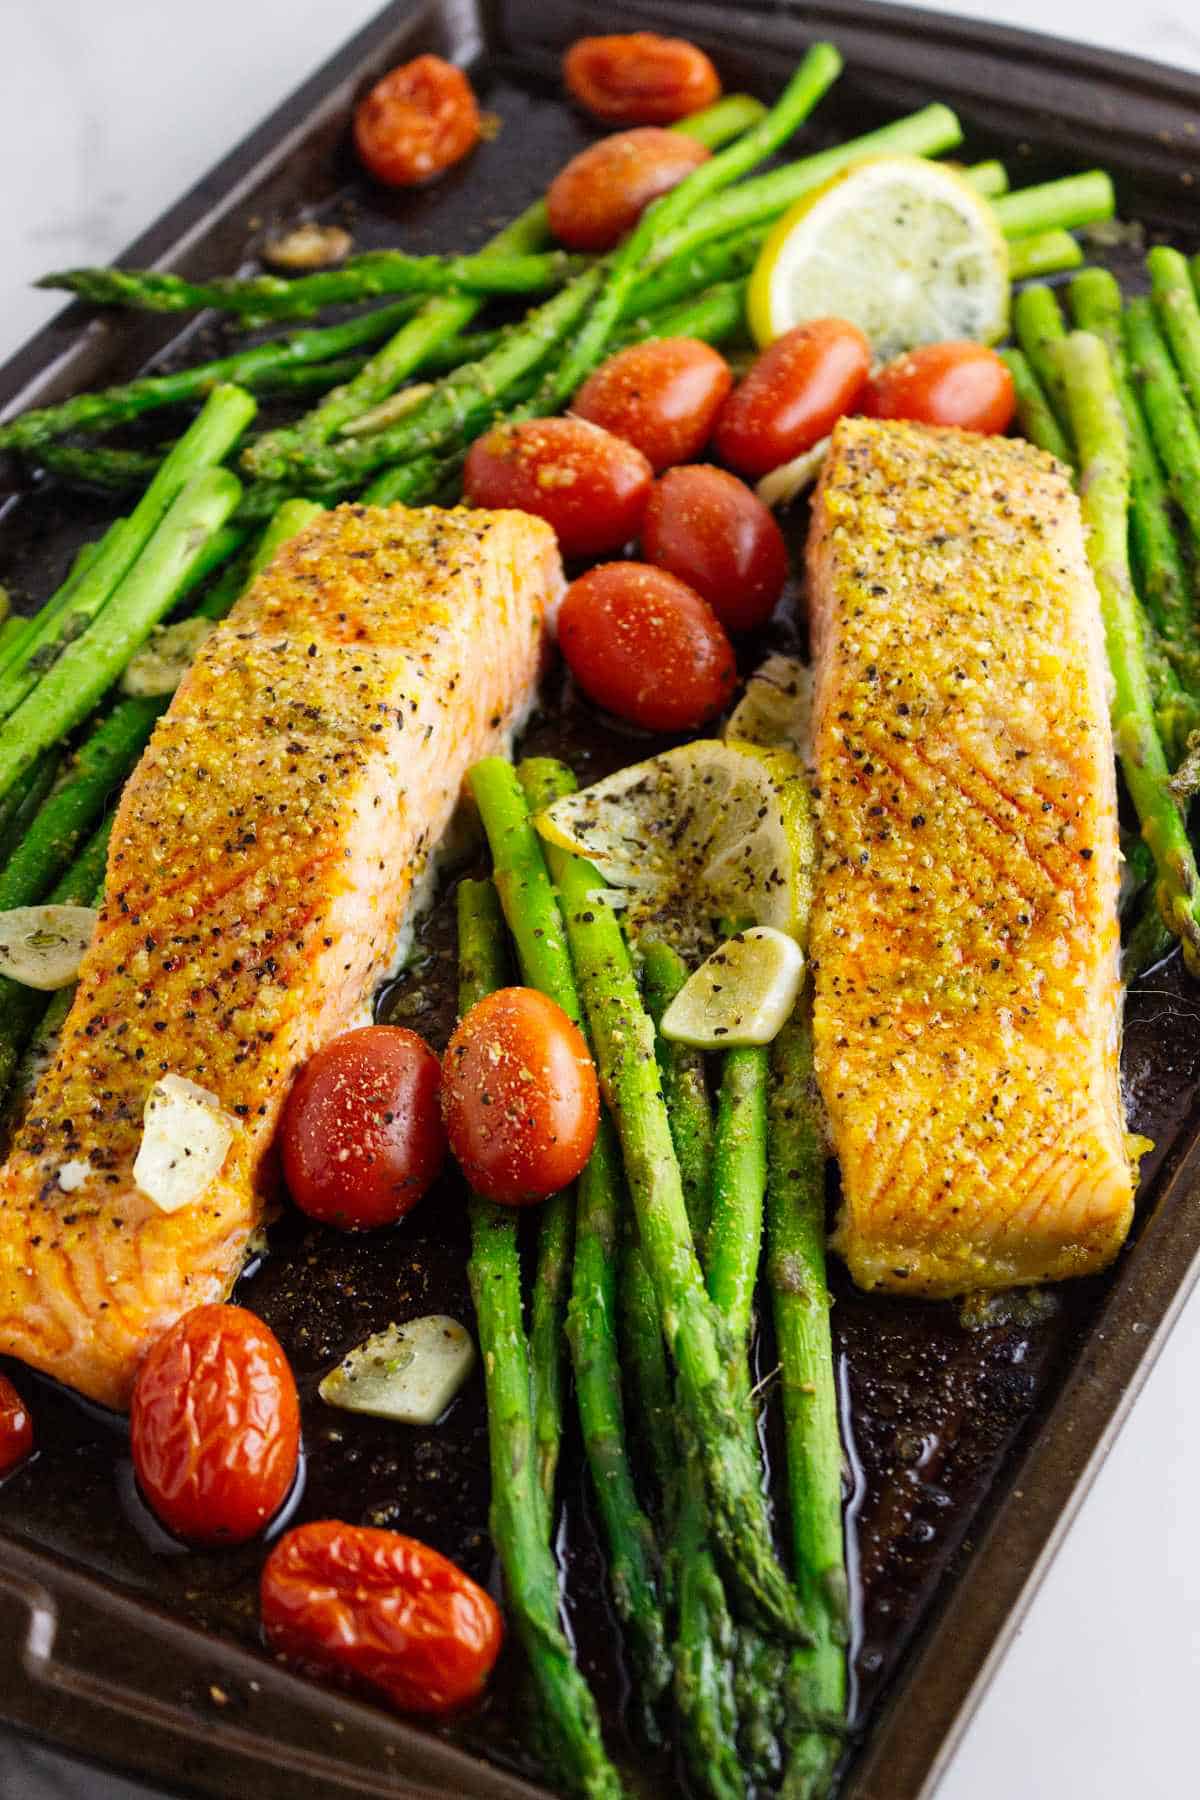 baking tray with roasted seasoned asparagus spears, sliced lemons, blistered tomatoes, and broiled Coho salmon.